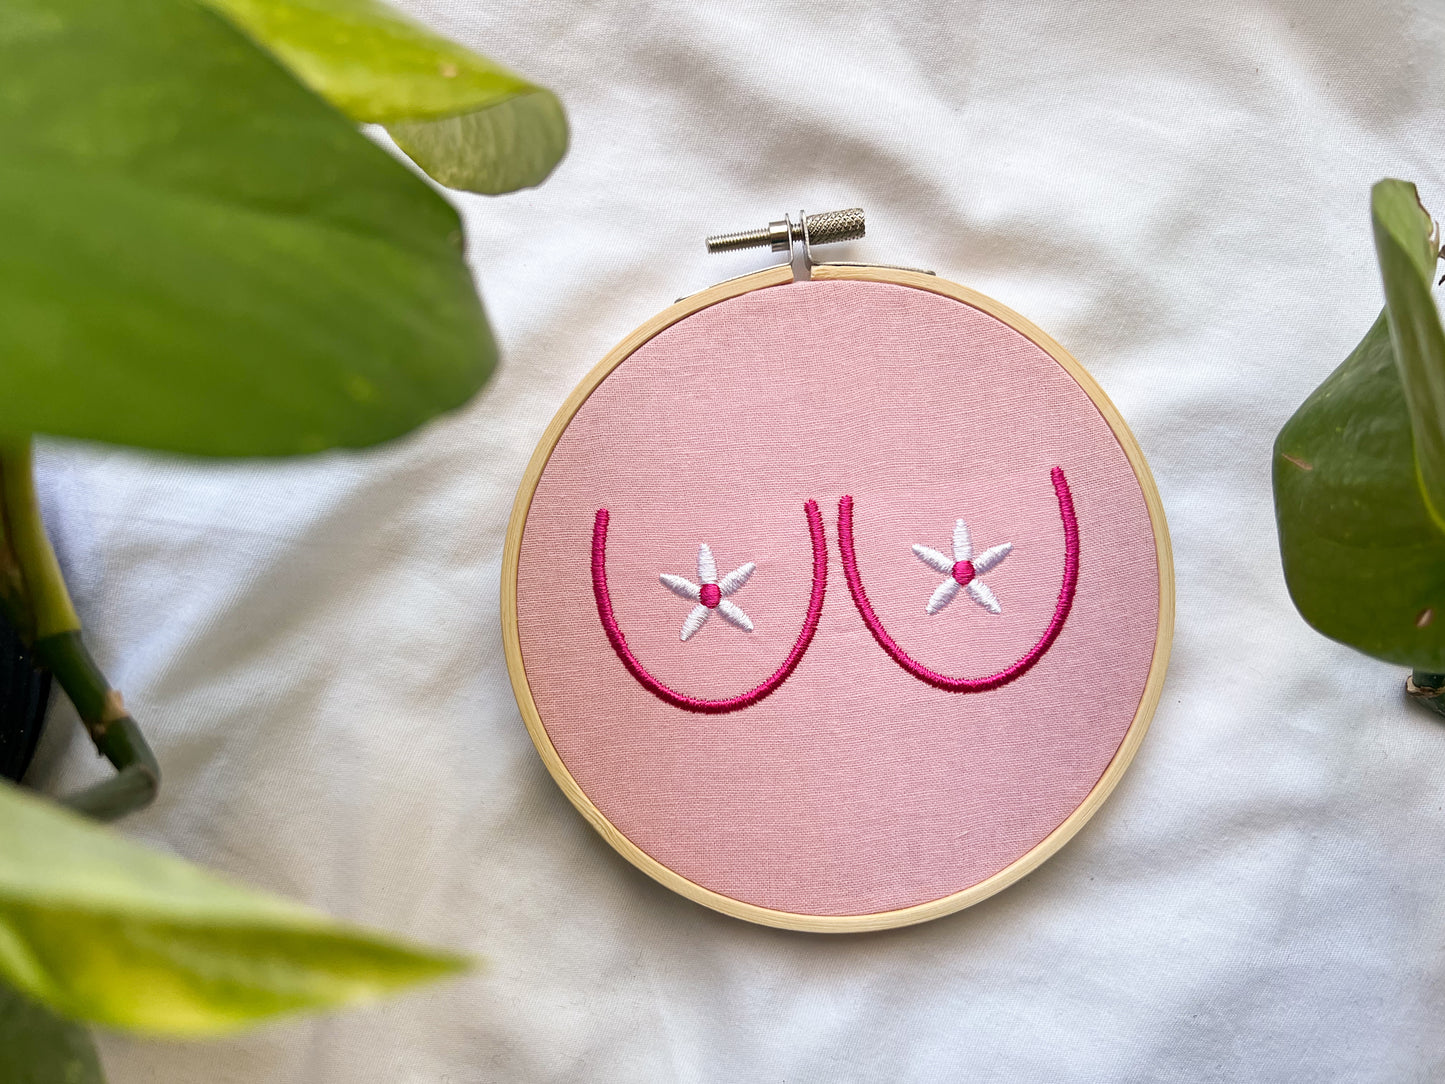 floral boobies embroidery